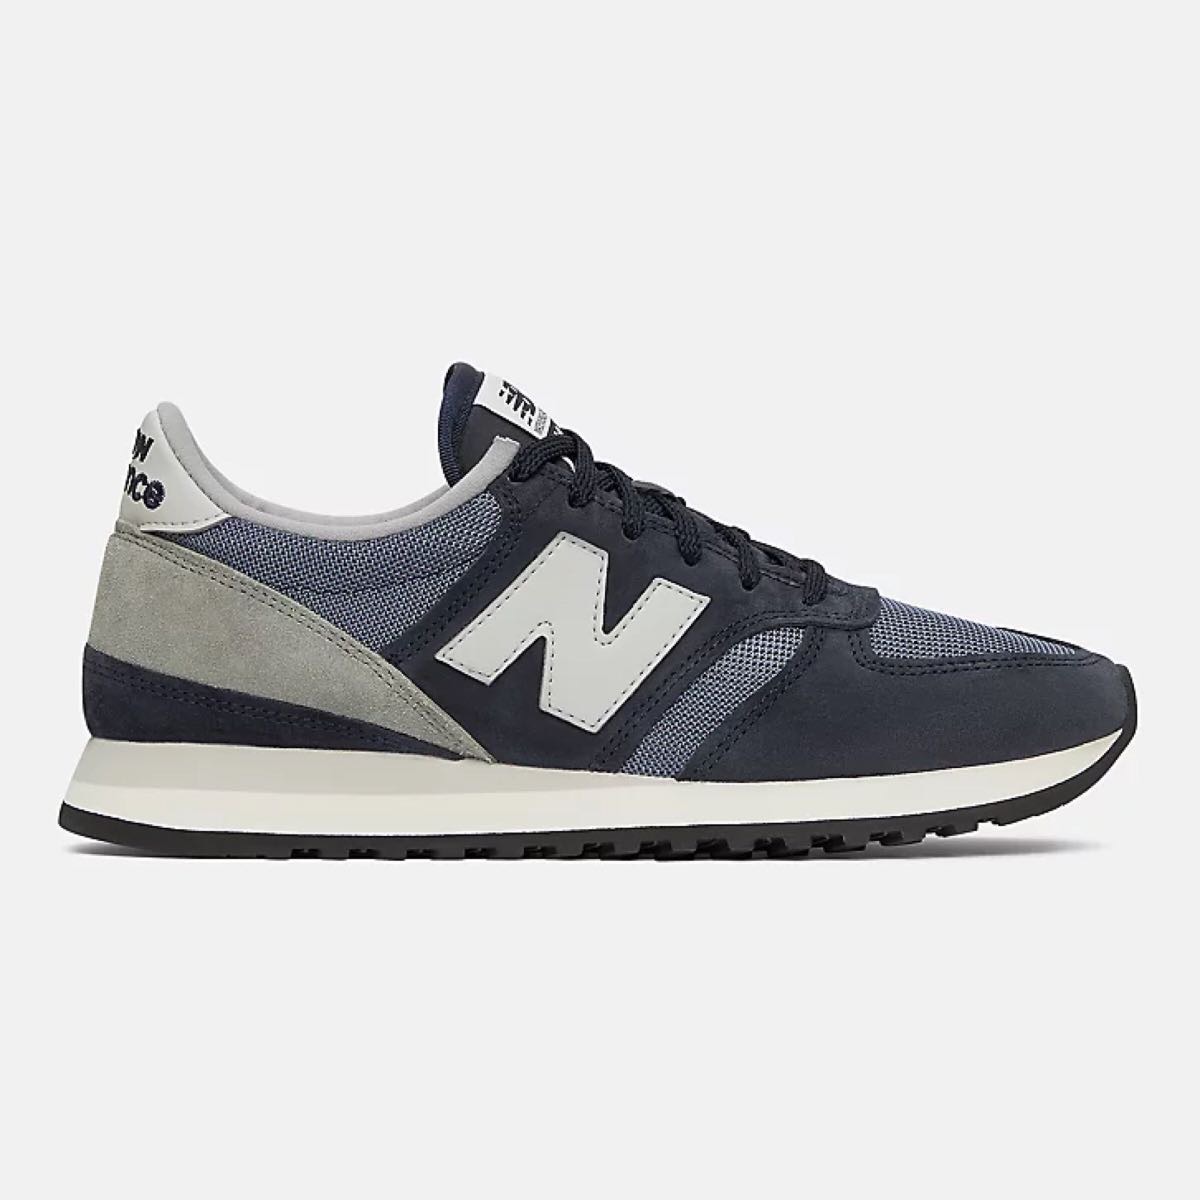 New Balance 730 Made in UK Navy with grey